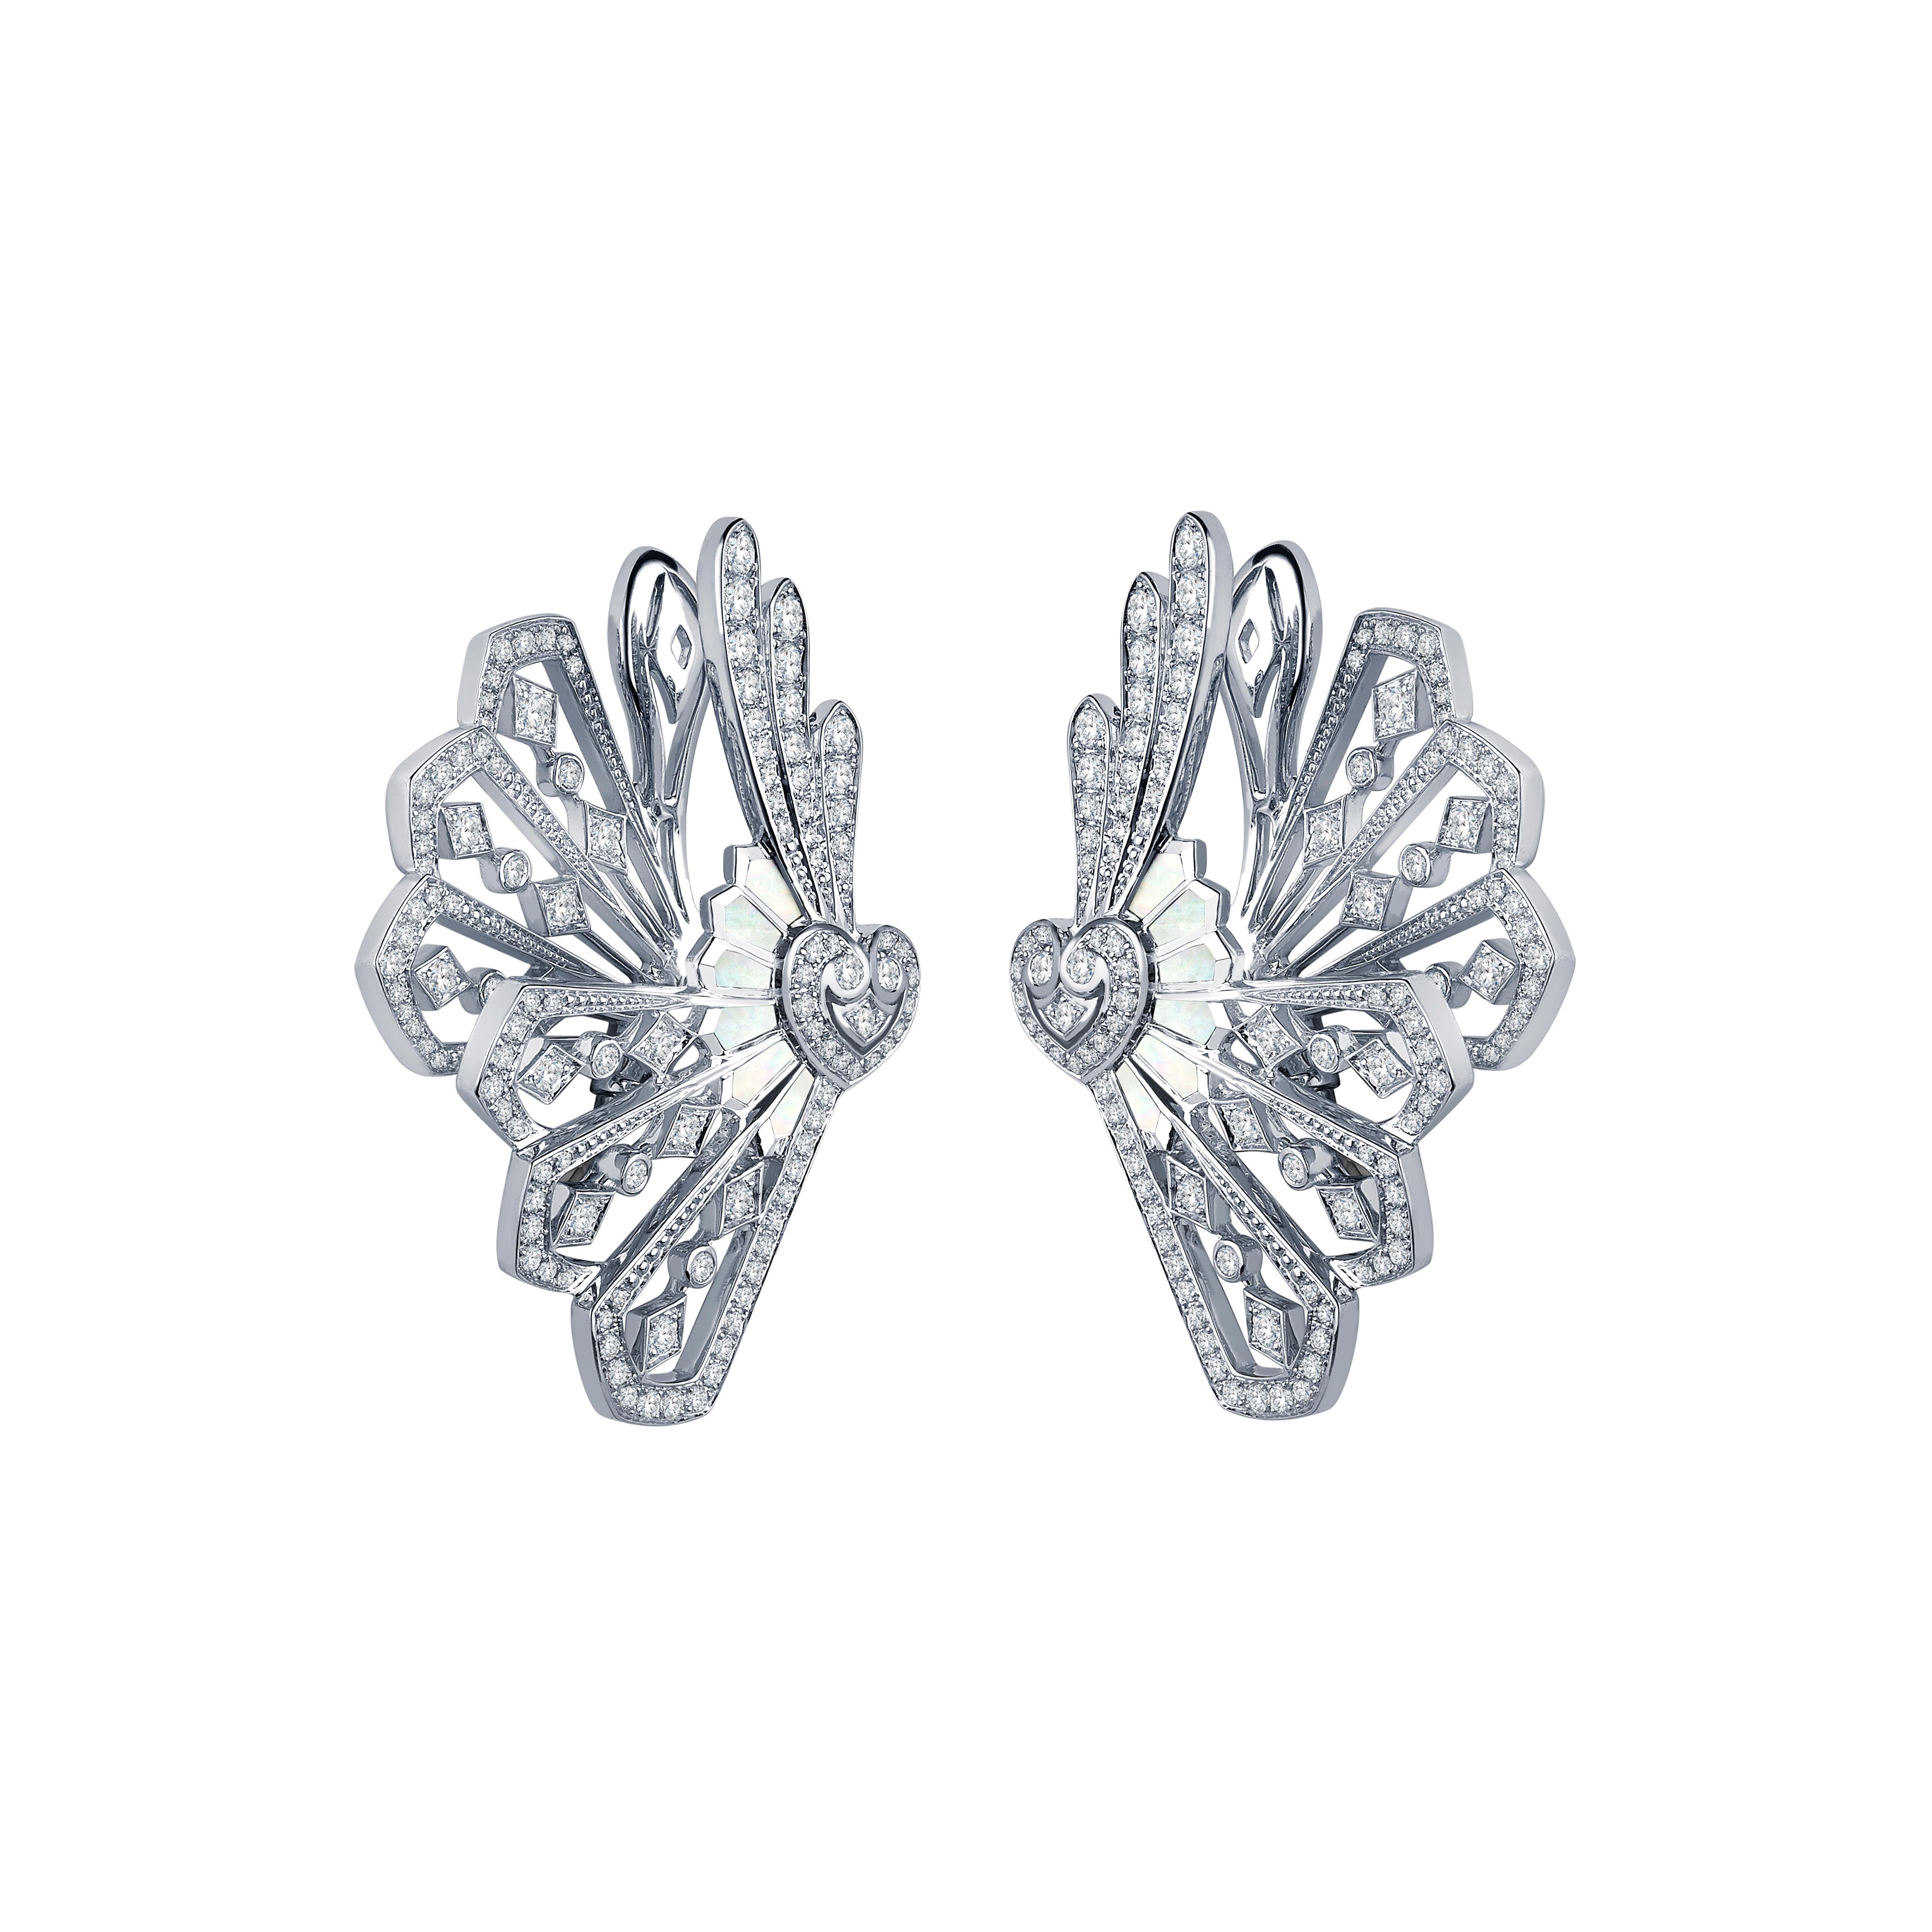 A pair of House of Garrard 18 karat white gold  ear climbers from the 'Fanfare' collection, set with round white diamonds and calibre cut white mother of pearl.

236 round white diamonds weighing: 1.80 carats
12 calibre cut white mother of pearl